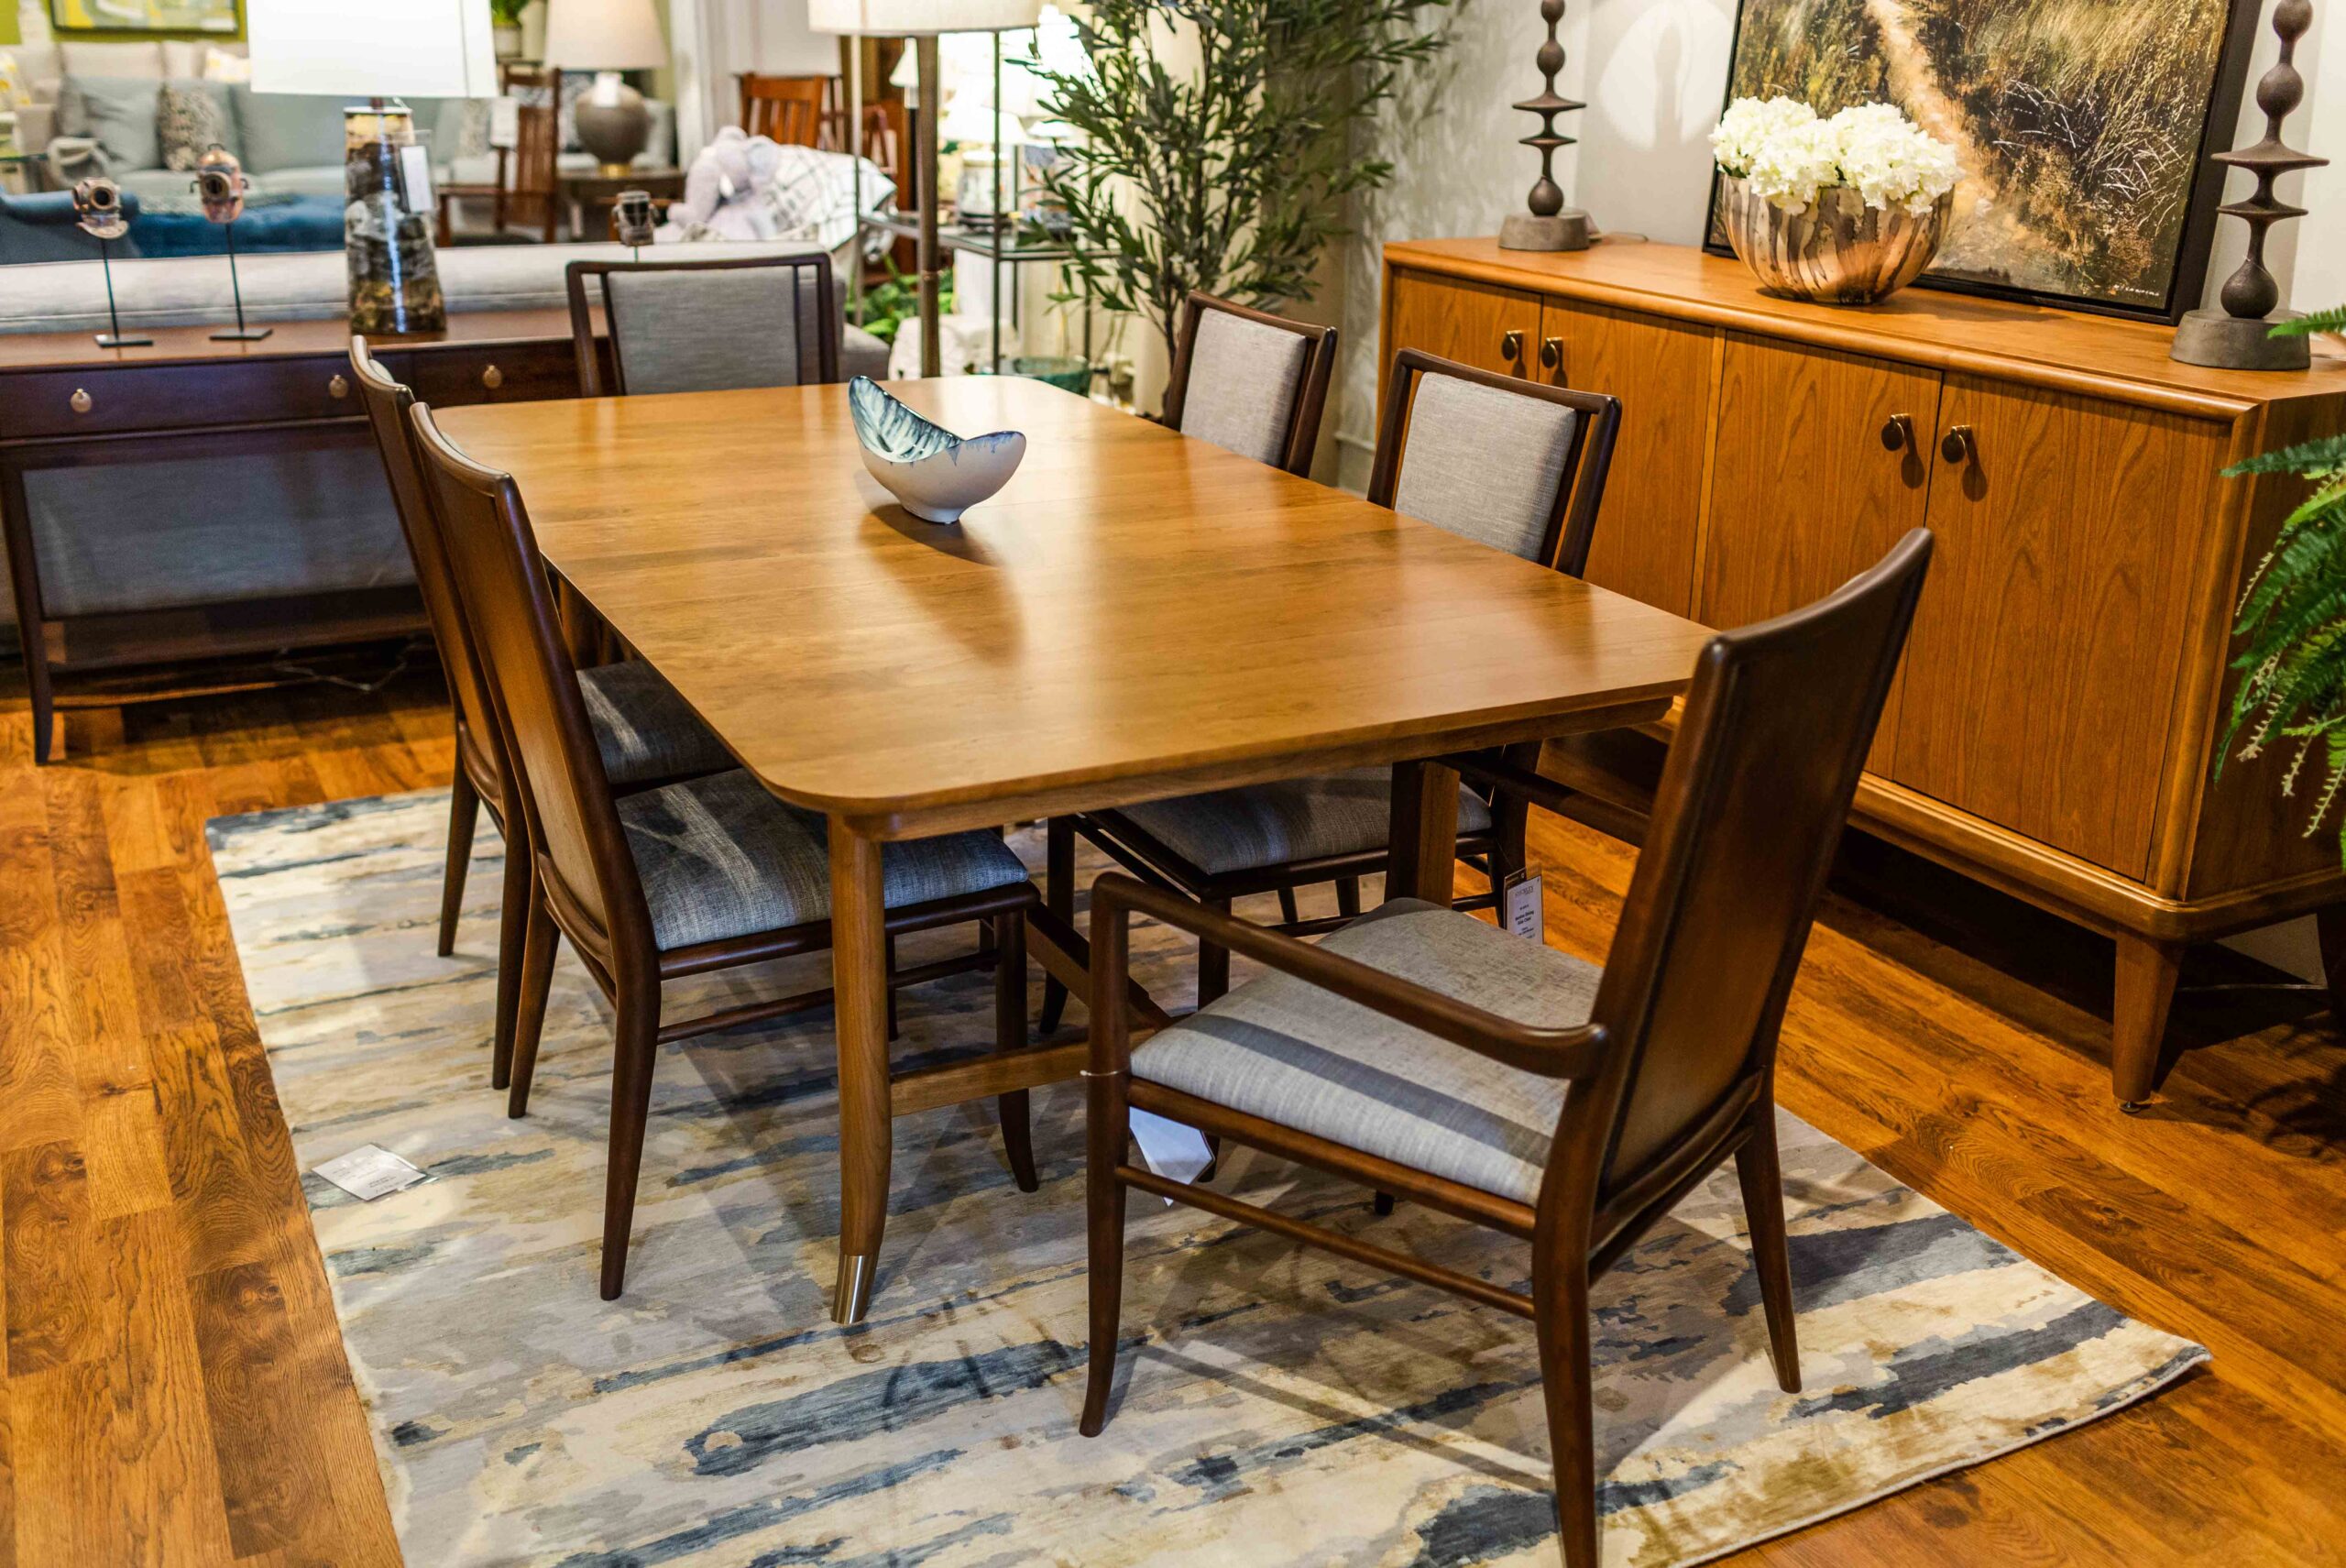 Stickley Martine Dining Table